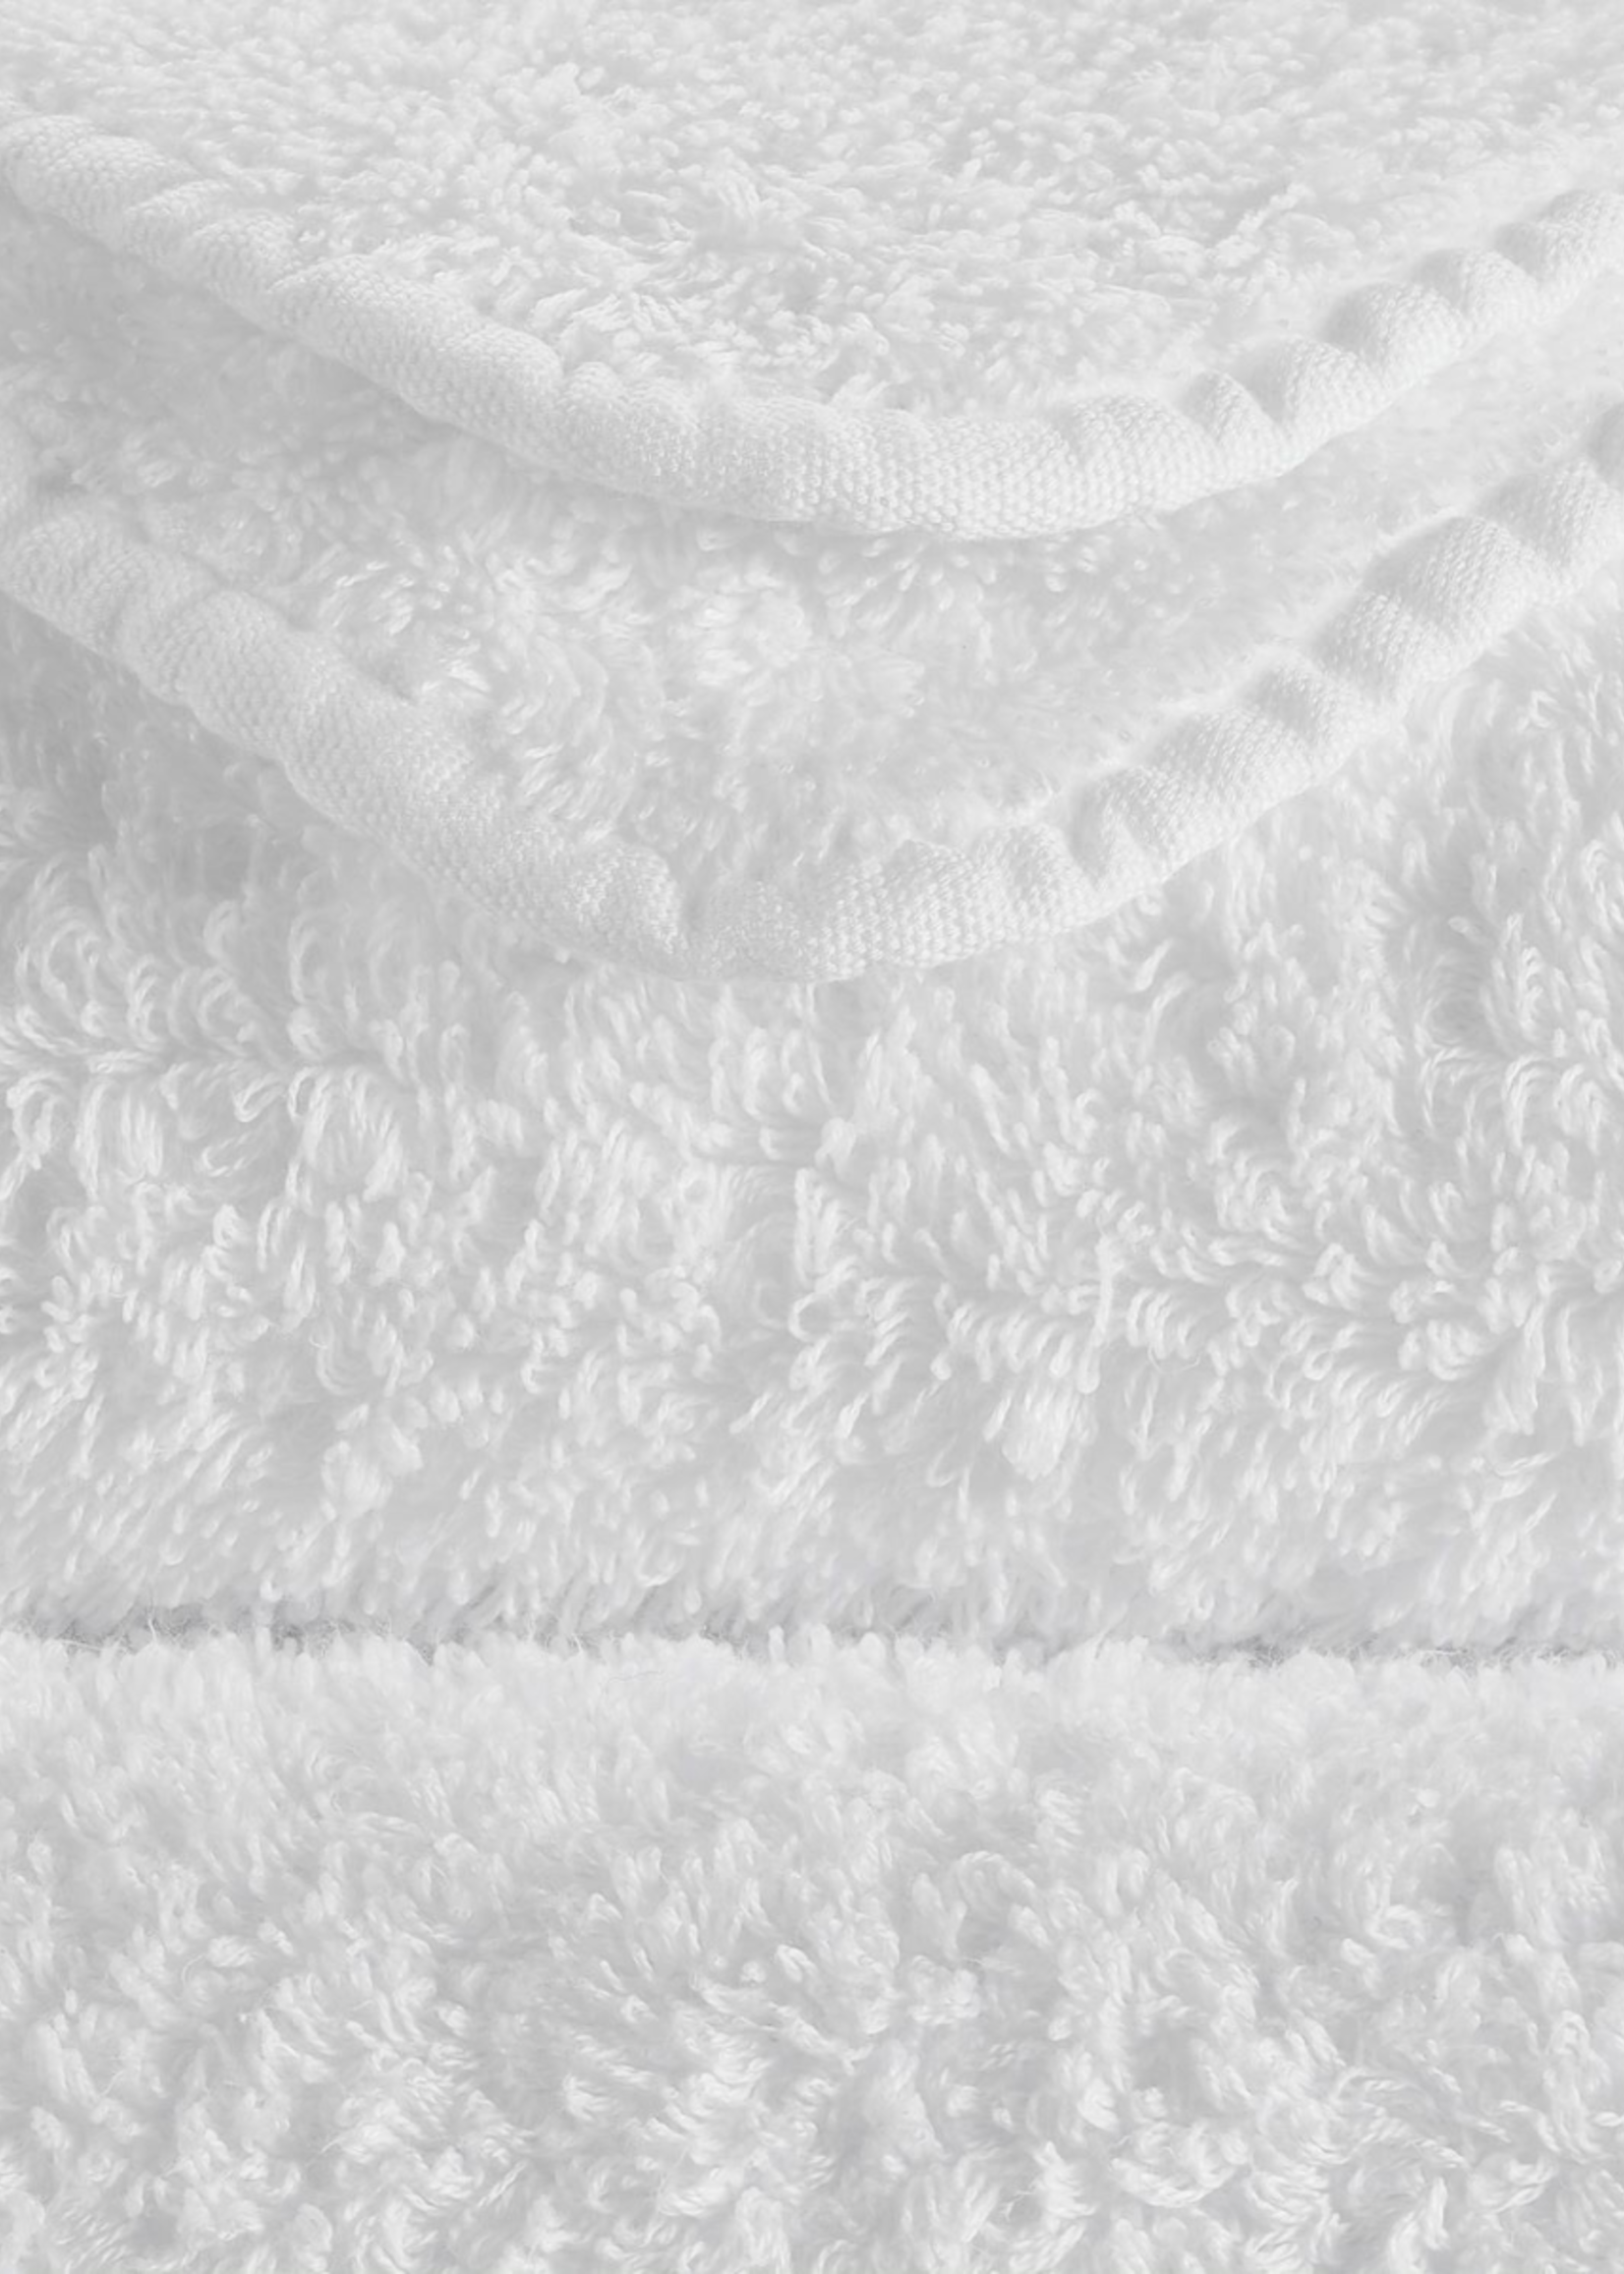 Abyss & Habidecor Abyss & Habidecor Super Pile White Towels